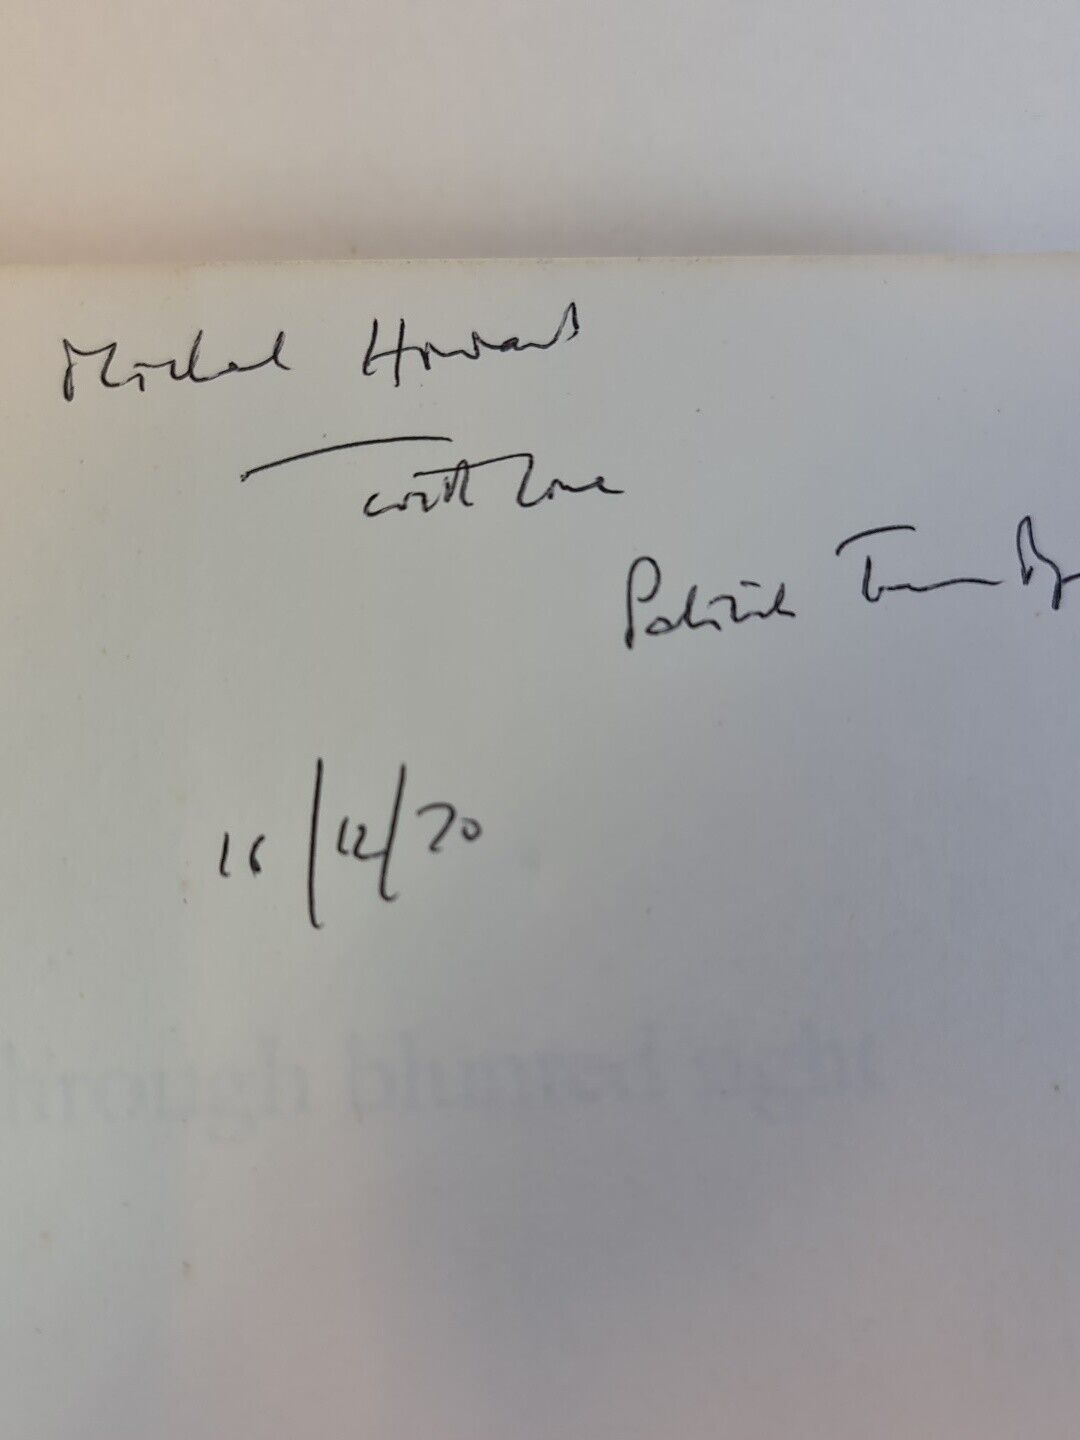 SIGNED- World Through Blunted Sight... by Patrick Trevor-Roper (1970)